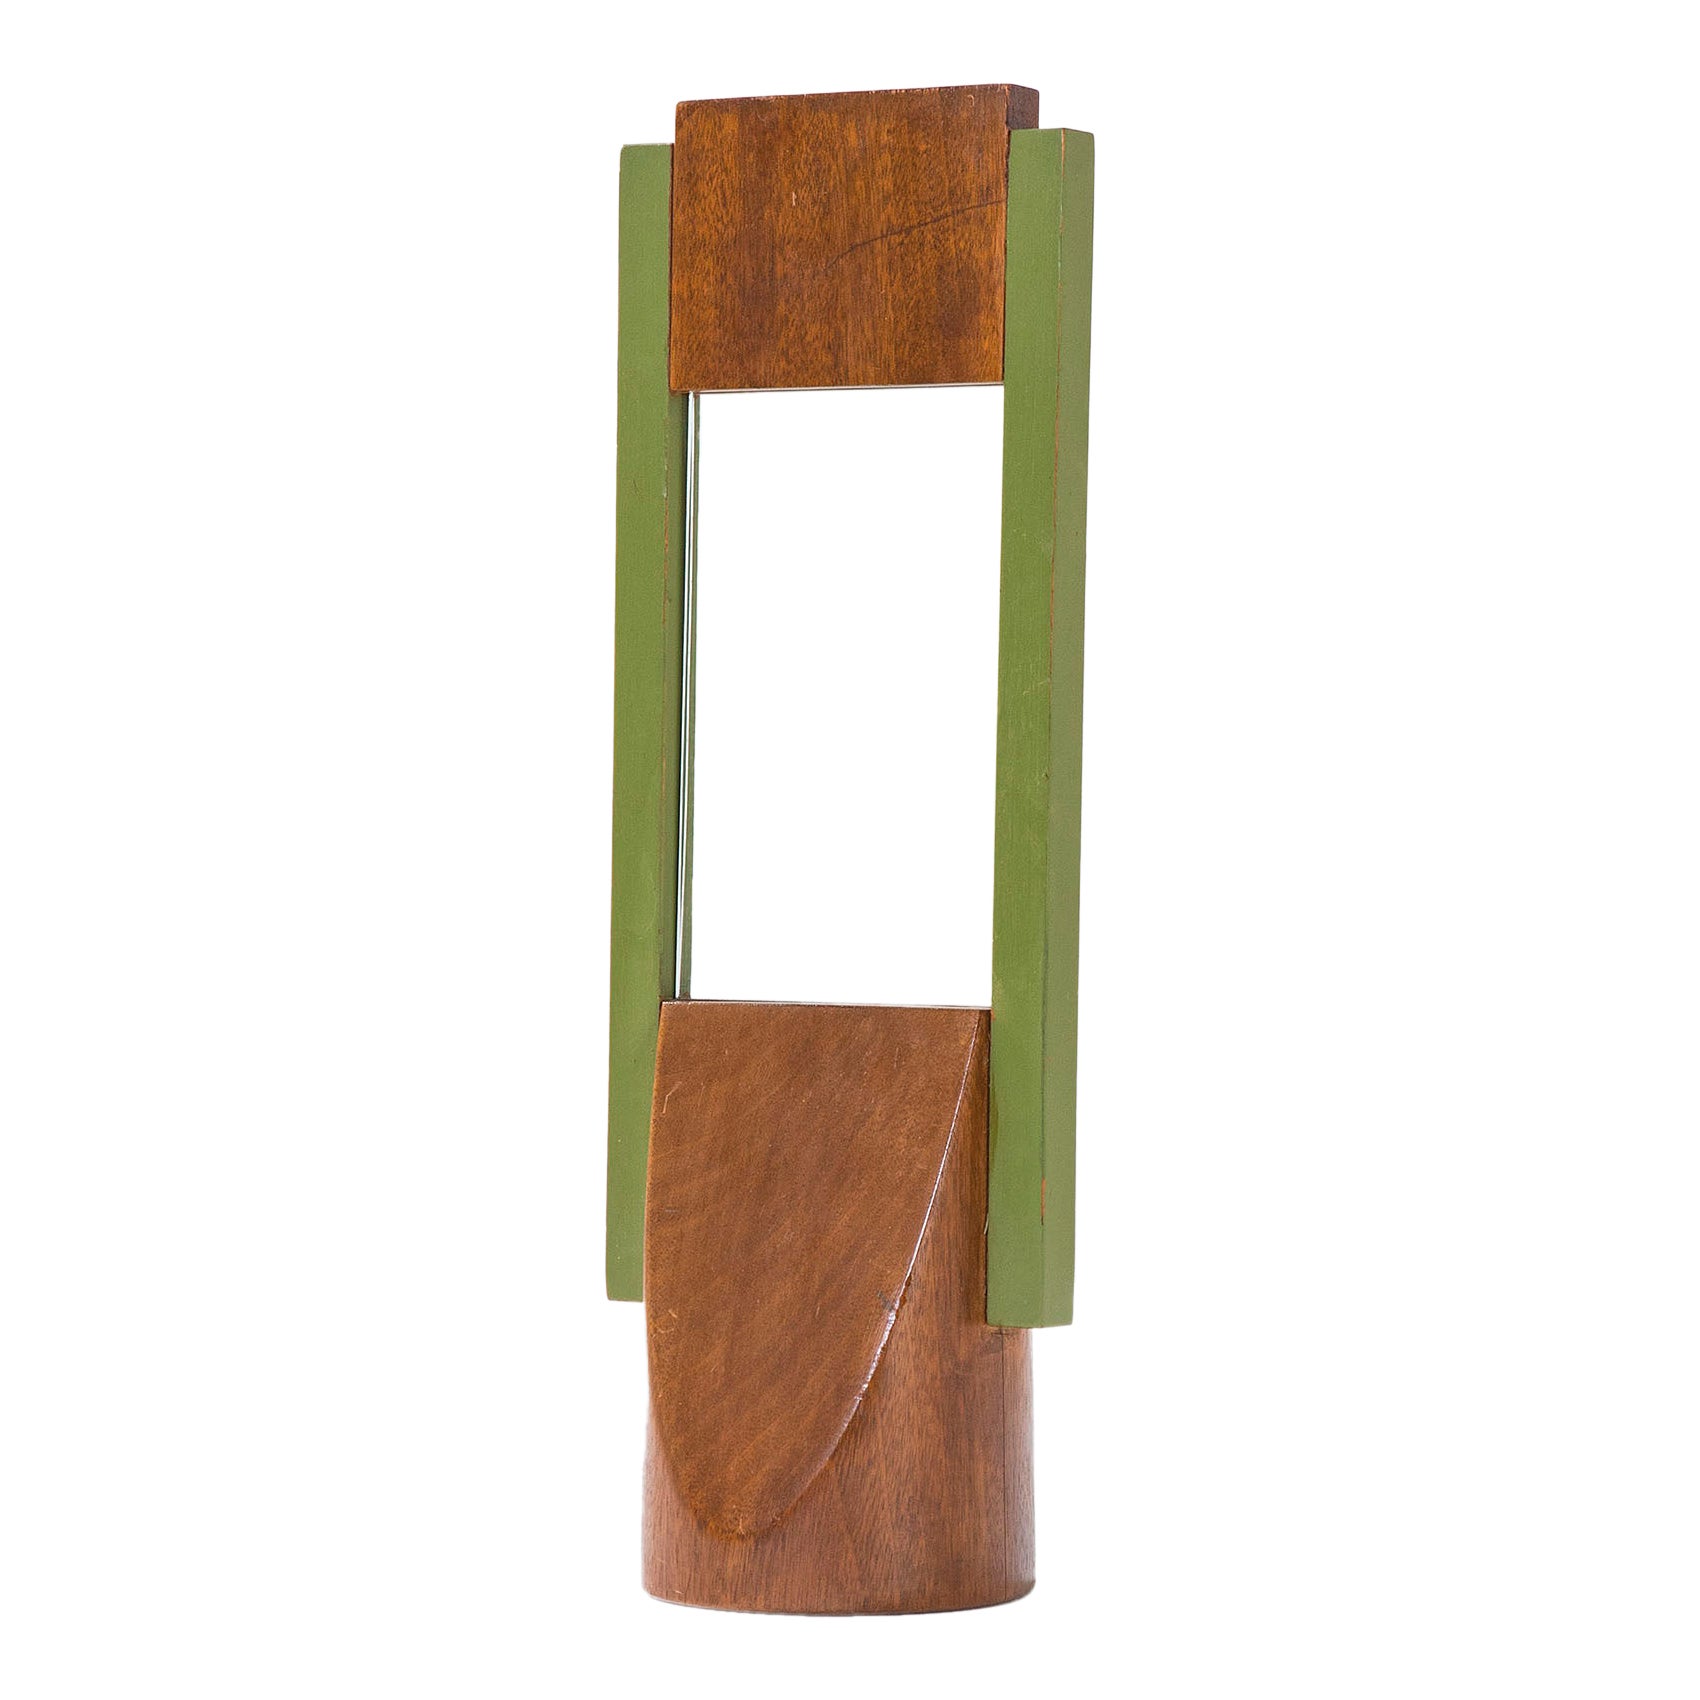 20th Century Ettore Sottsass Wooden Picture Frame for Il Sestante, 1960s For Sale